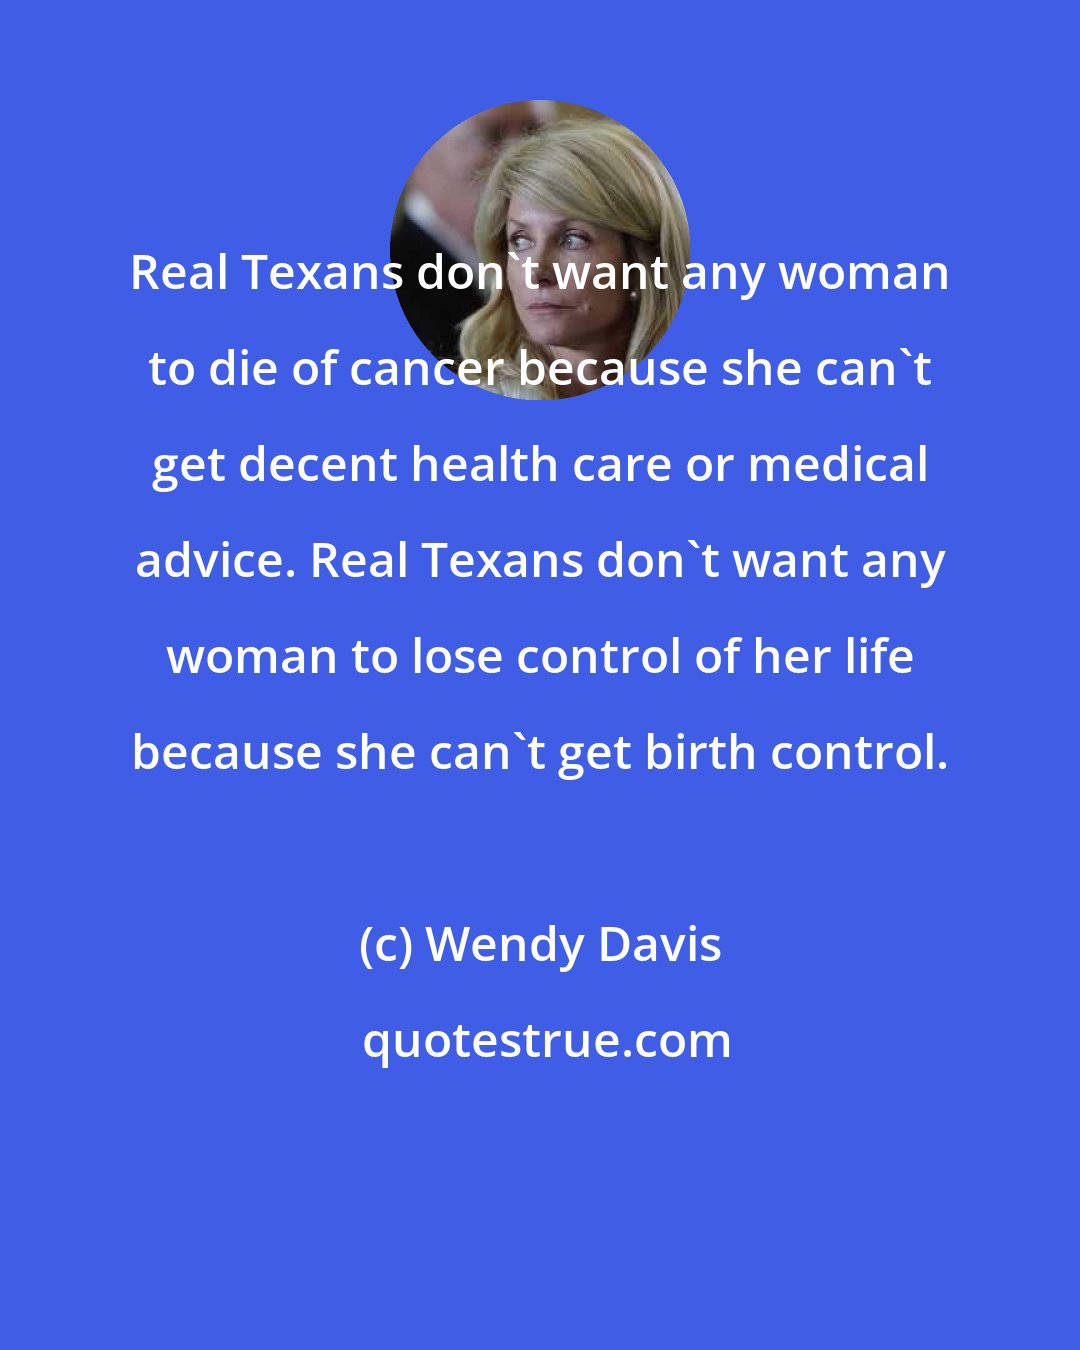 Wendy Davis: Real Texans don't want any woman to die of cancer because she can't get decent health care or medical advice. Real Texans don't want any woman to lose control of her life because she can't get birth control.